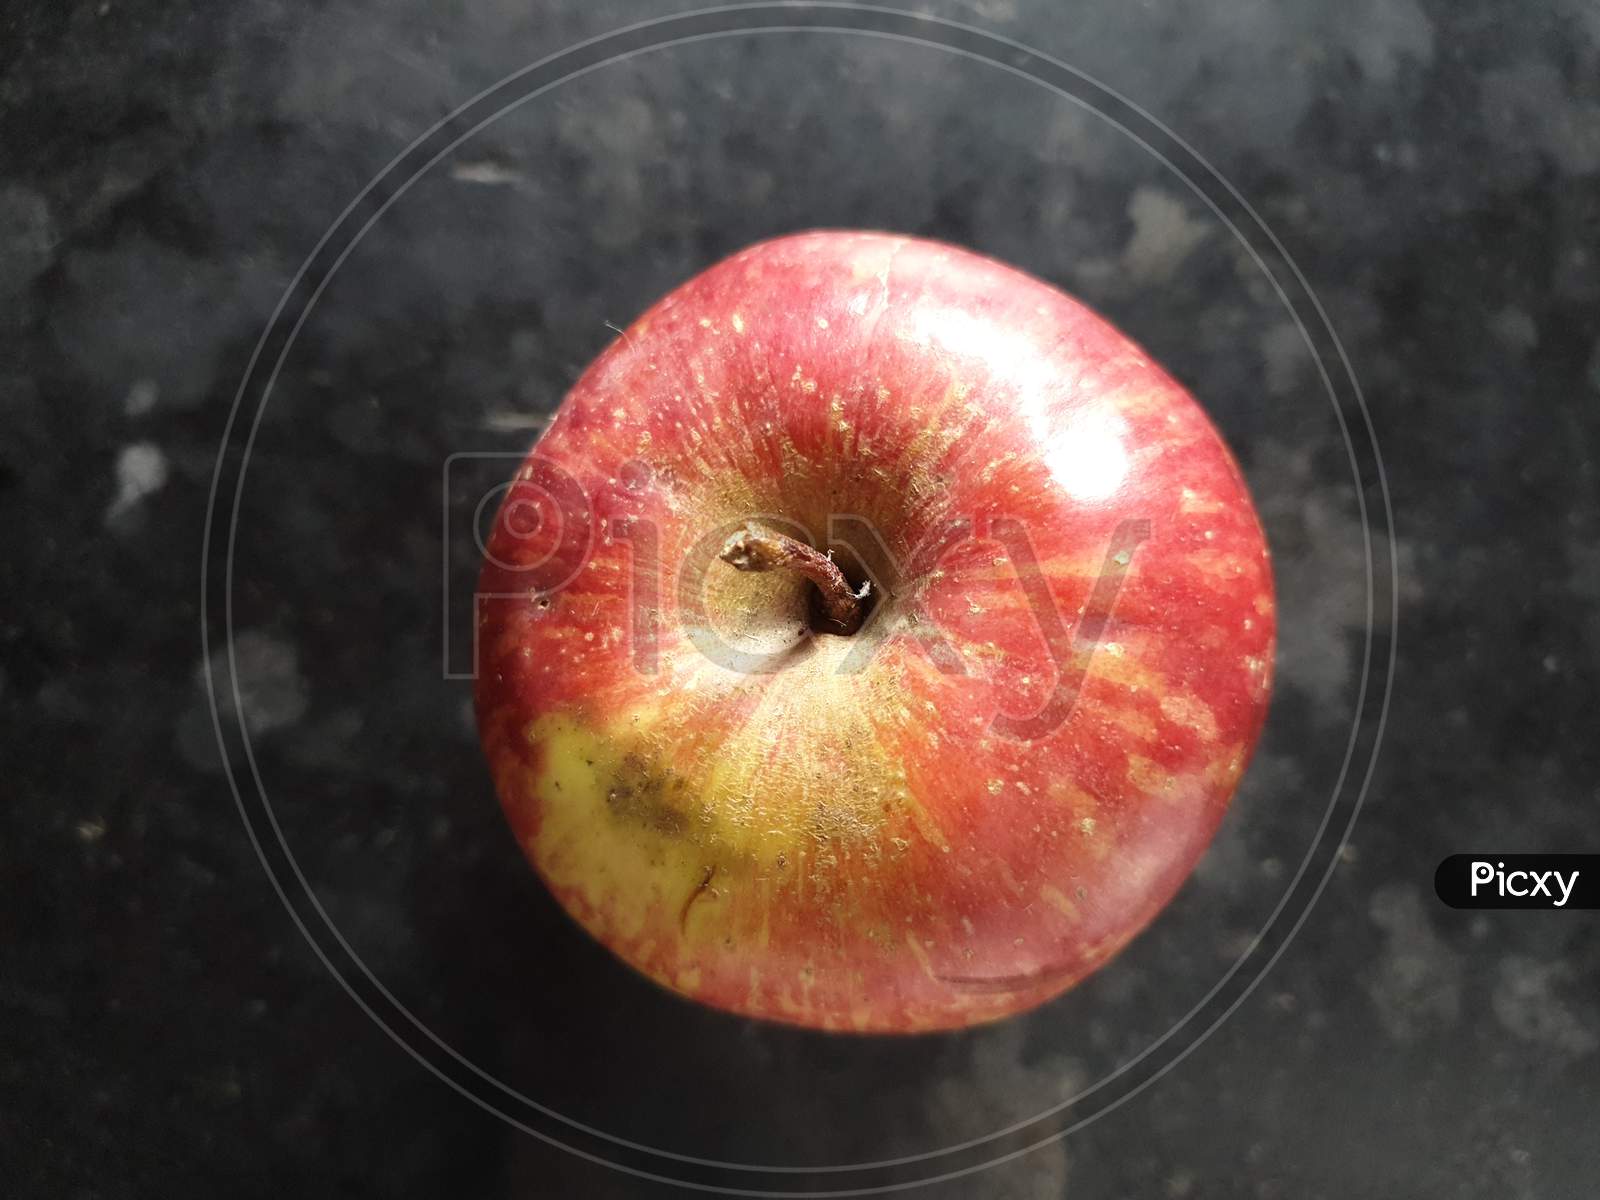 This is an apple